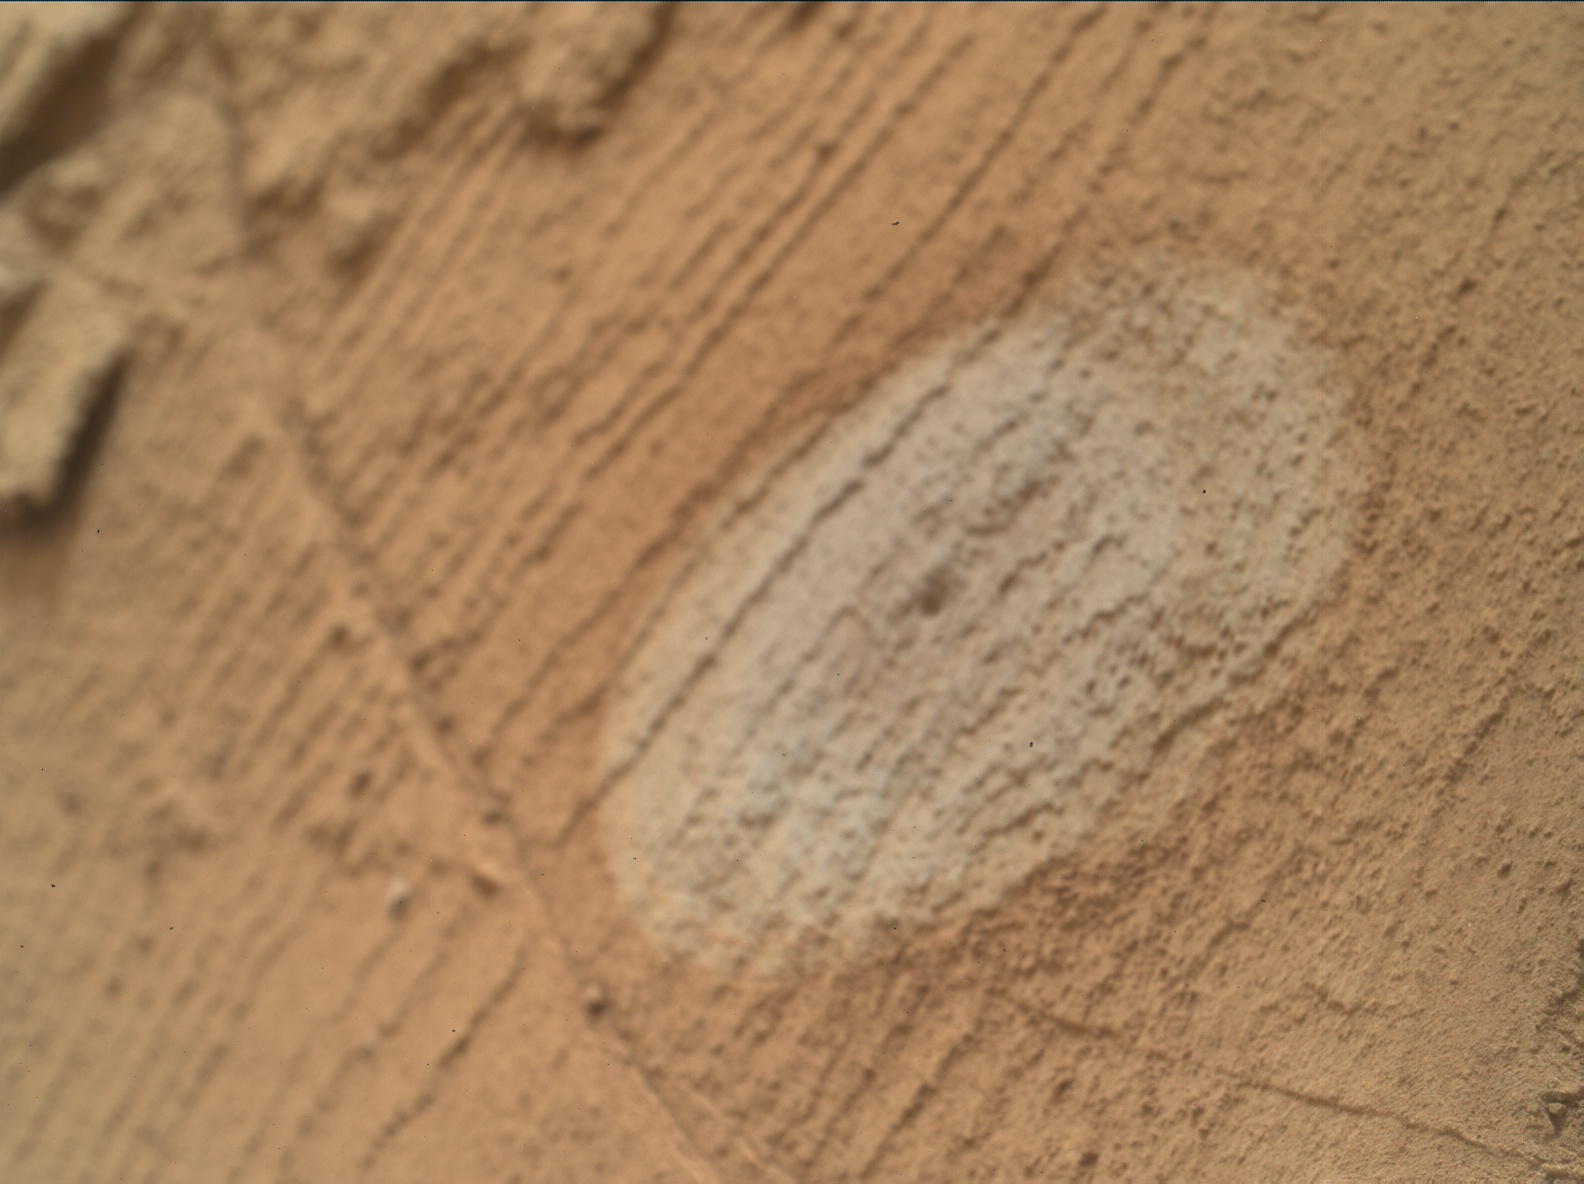 Nasa's Mars rover Curiosity acquired this image using its Mars Hand Lens Imager (MAHLI) on Sol 806